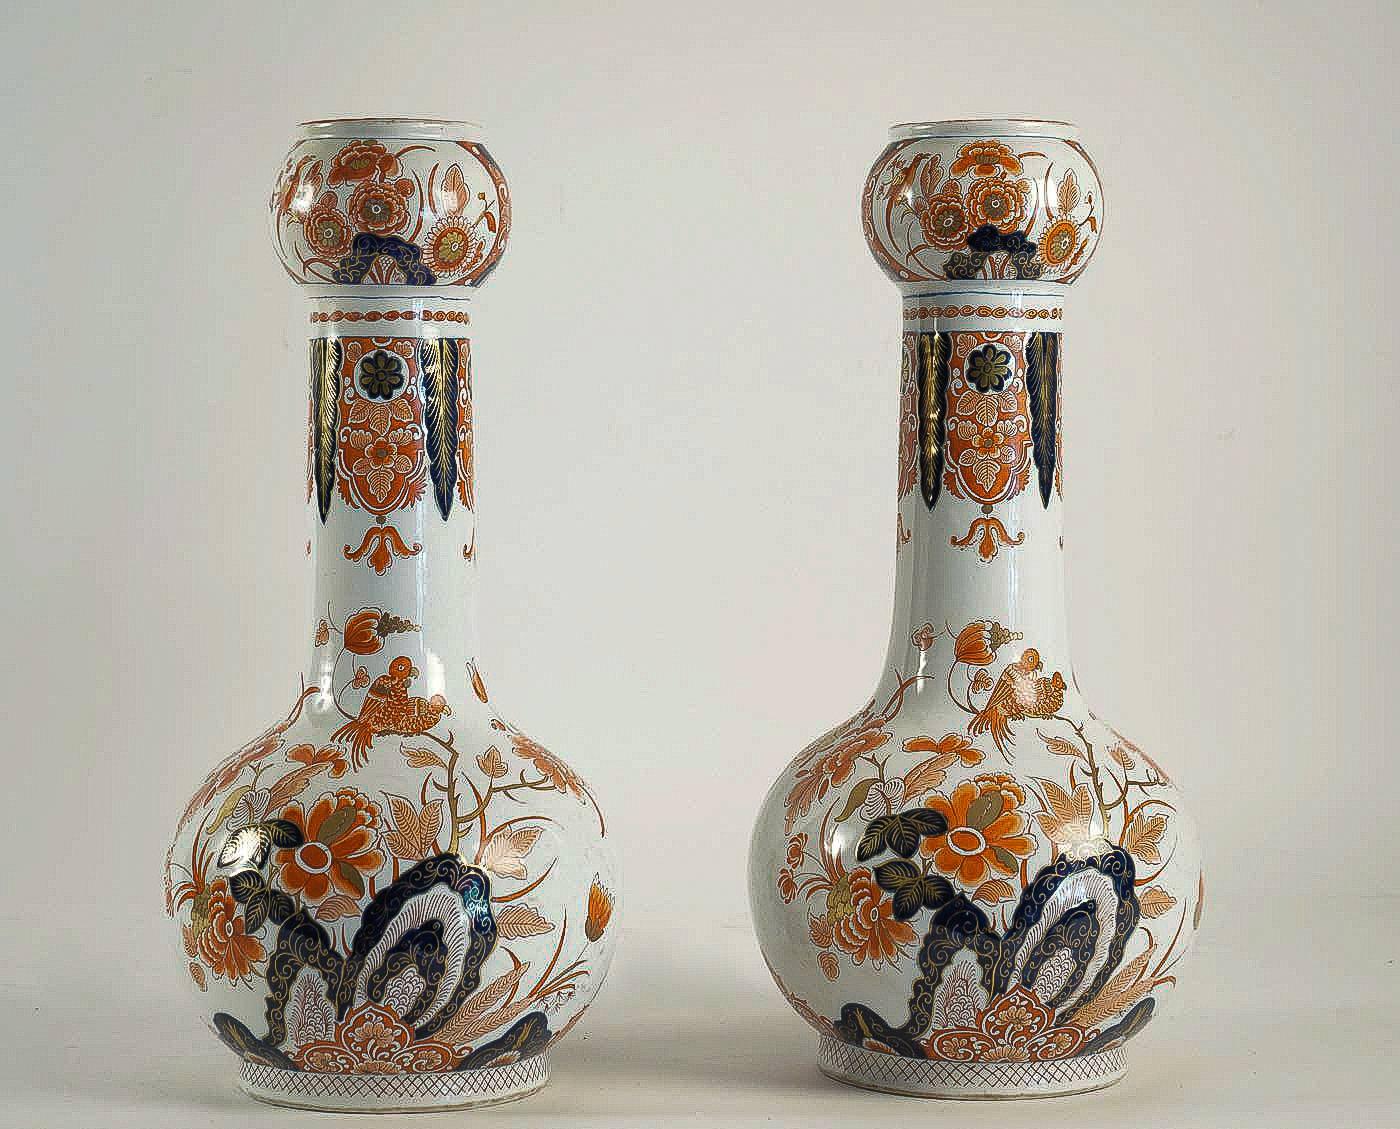 A beautiful and rare Delft faience polychrome pair of gourd-shaped vases, decorated in Imari style in red, blue et gold colors with hand-painted stylized flowers, Lotus flowers end birds, opaque tin glazes that made in Delft 18th century.

Our